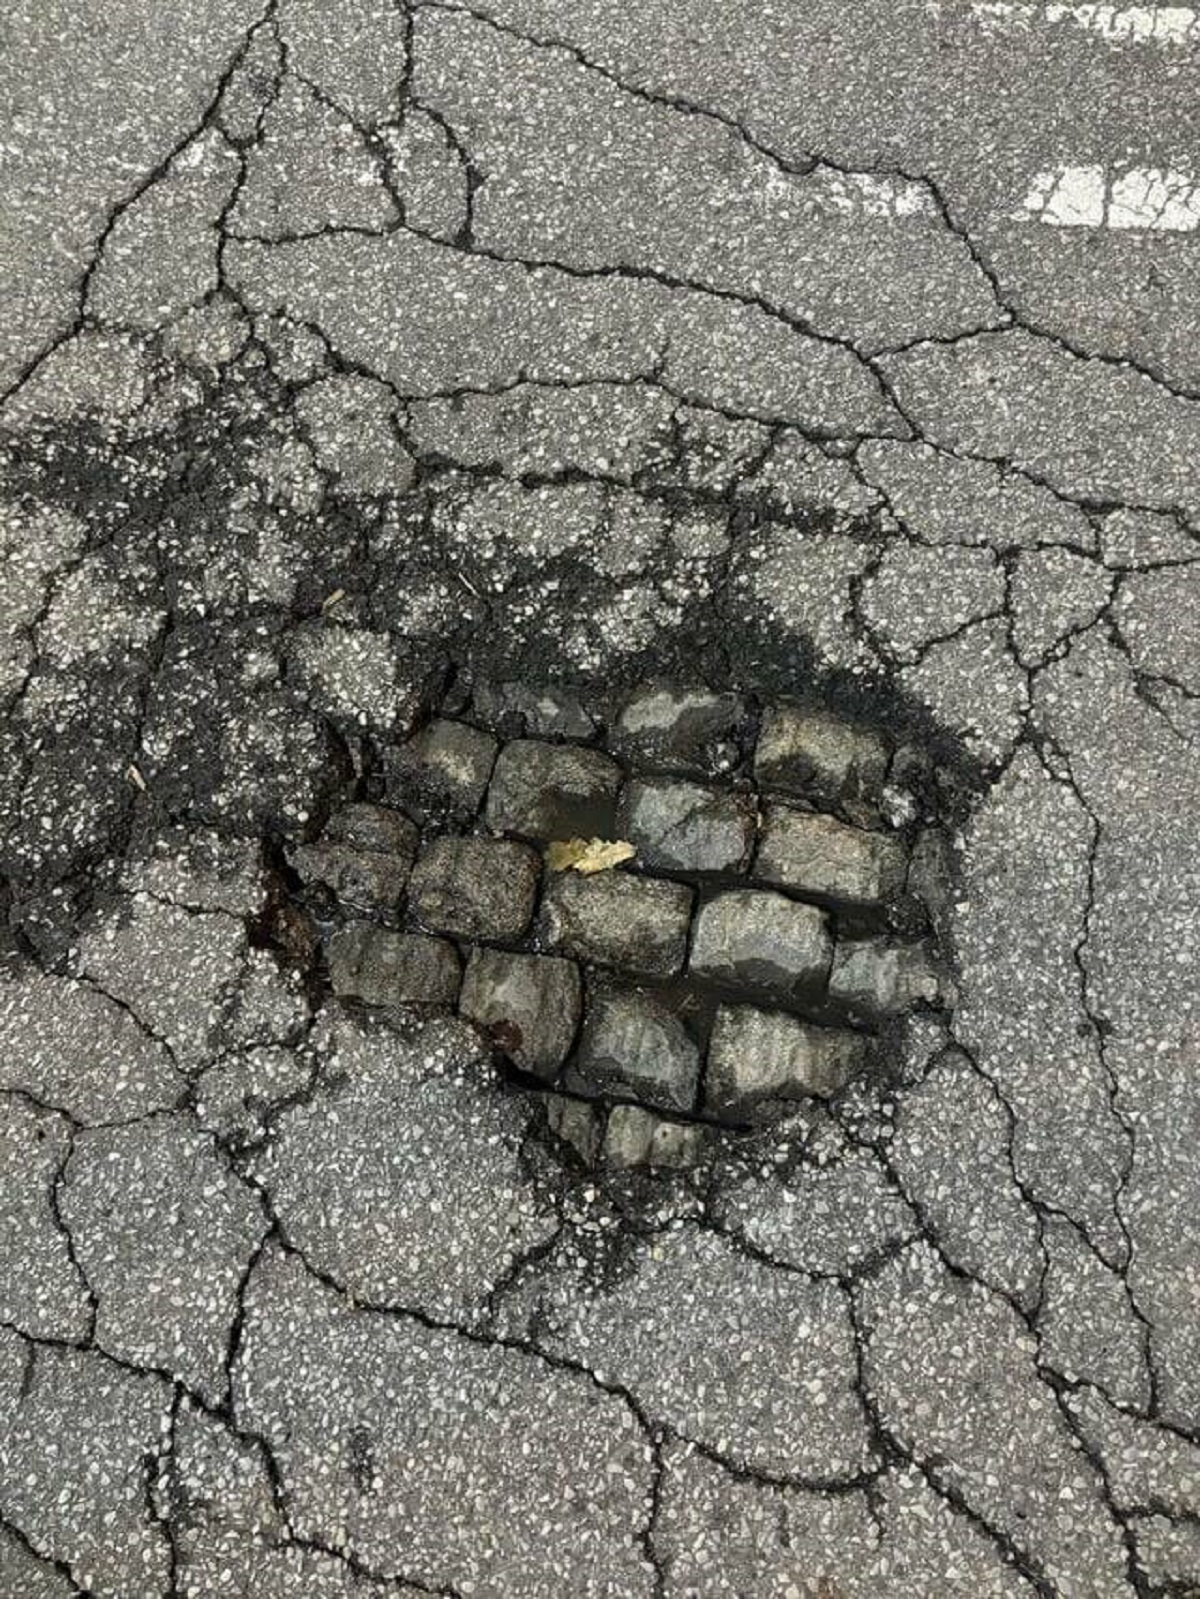 "In downtown Cincinnati, all the roads used to be cobbled instead of asphalt and apparently they never tore it up"